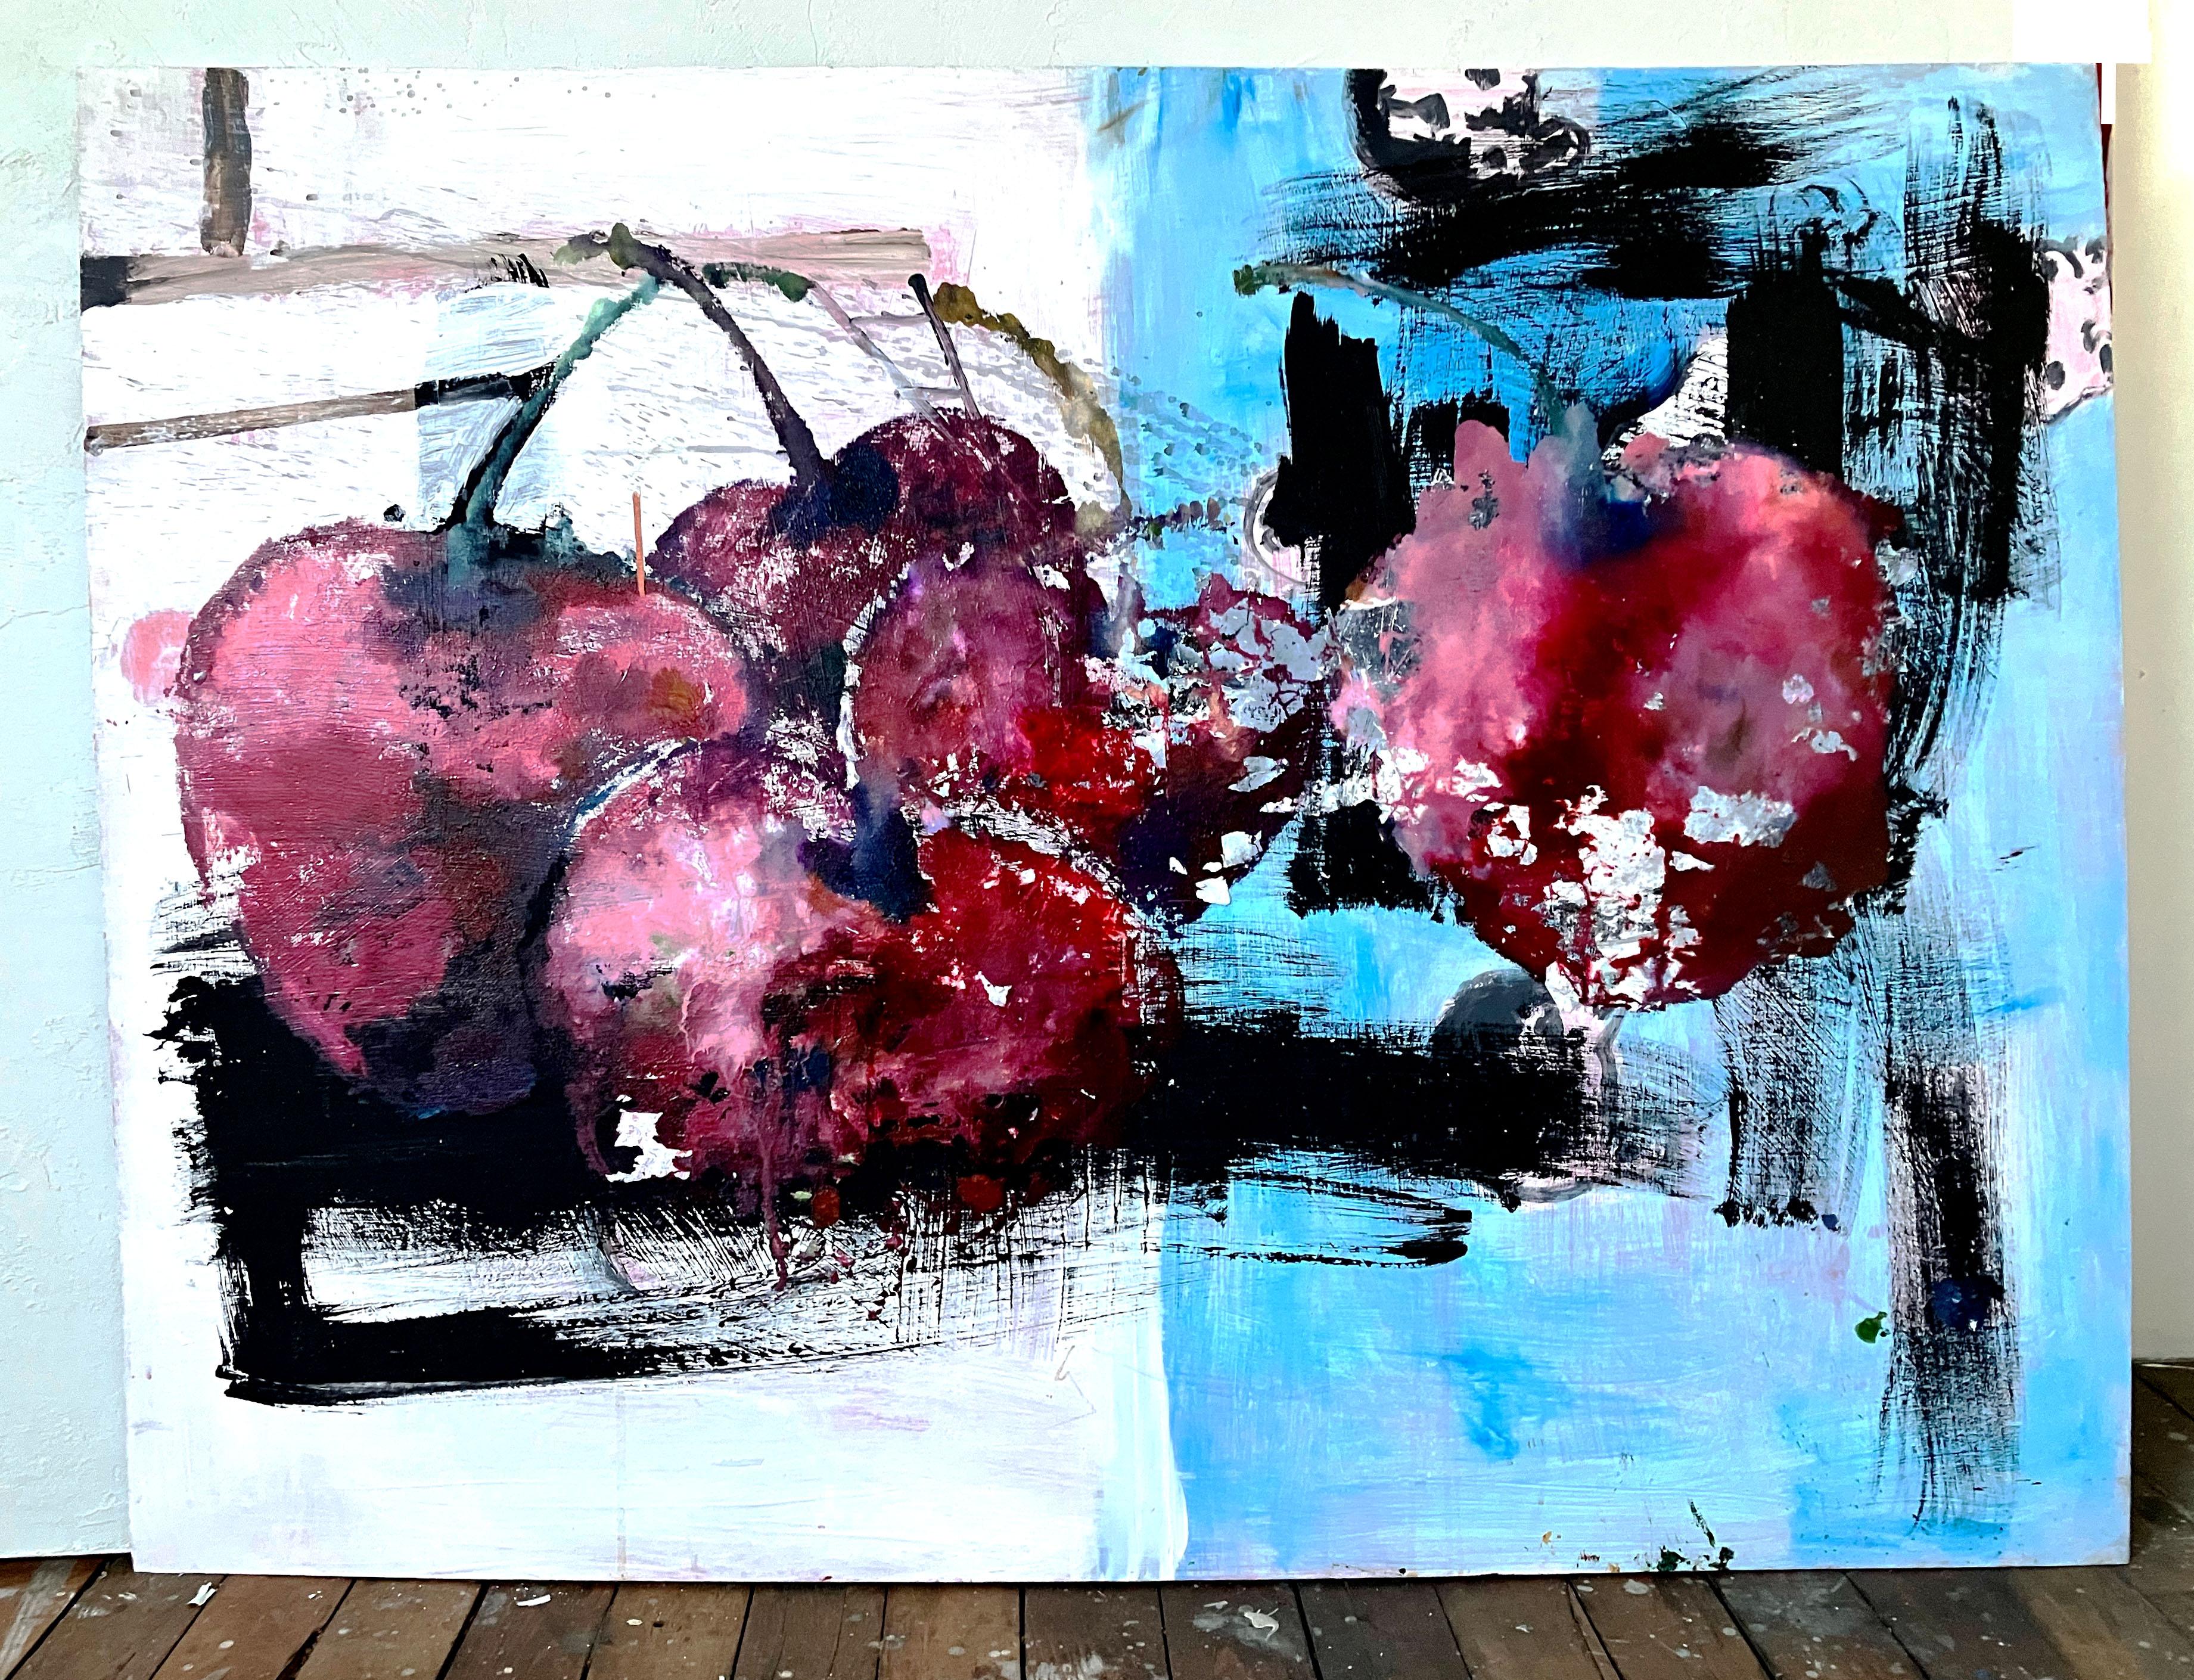 Cherries, abstracted still life blue, white, fruit, brushwork - Painting by C. Dimitri